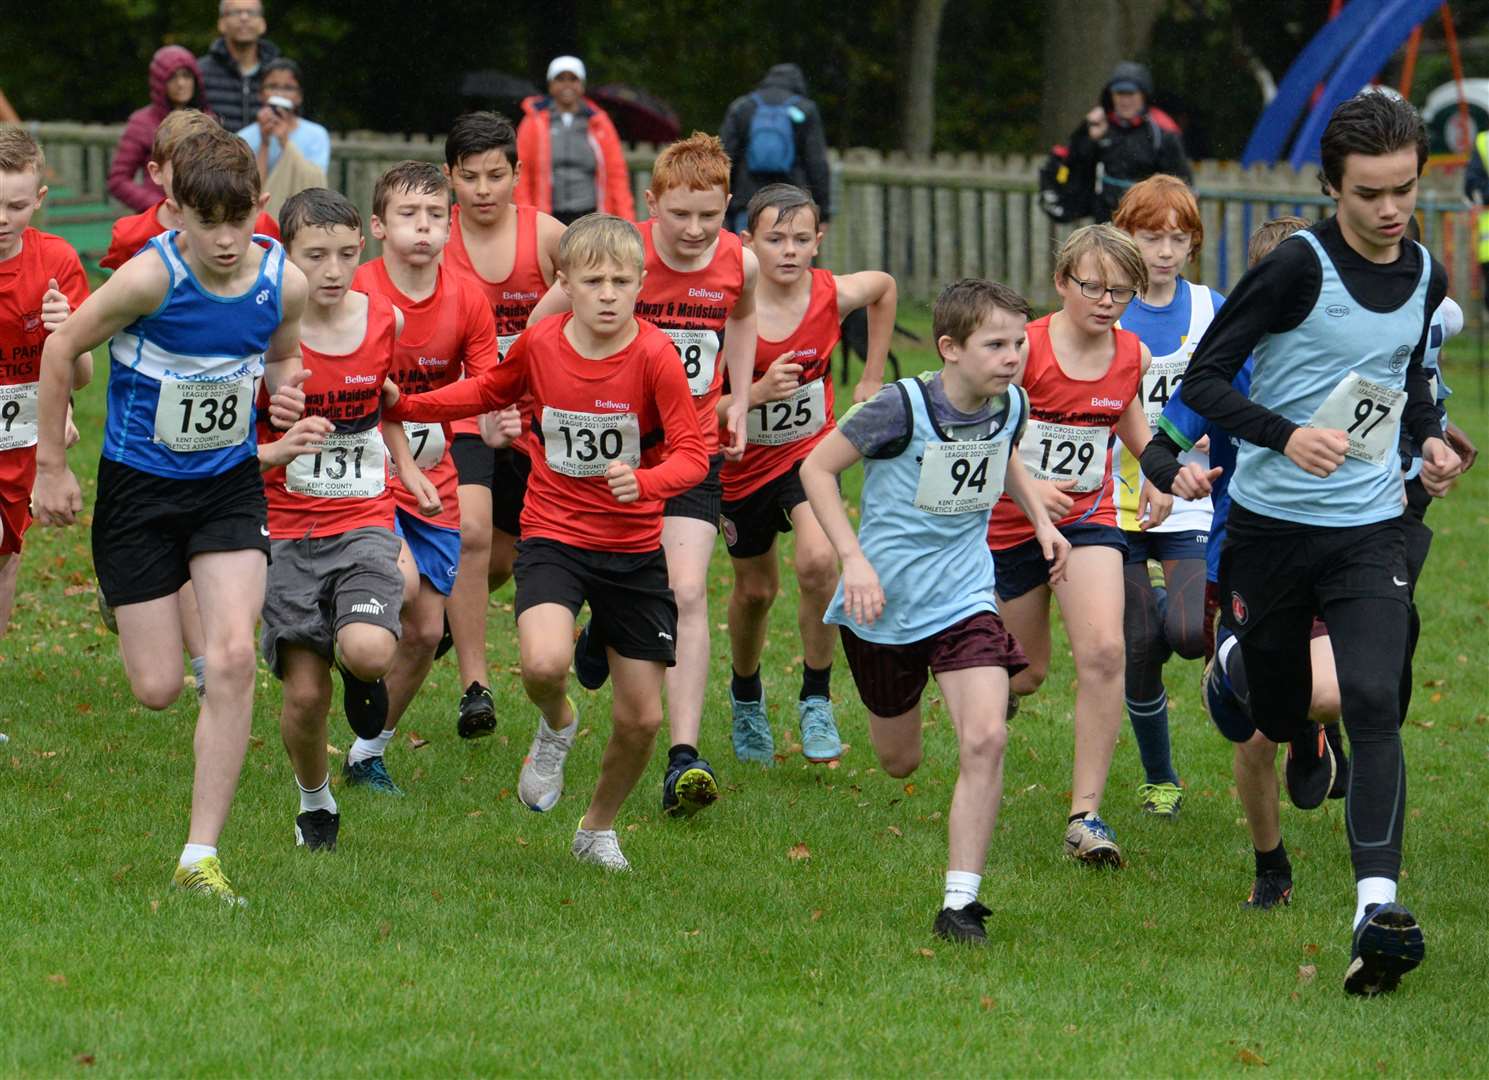 No.138 Oliver Darcy of Medway Tri up against No.130 Freddie Gibson of Medway & Maidstone and No.94 Oliver Hill for Cambridge Harriers in the under-15 boys' race. Picture: Chris Davey (52347960)